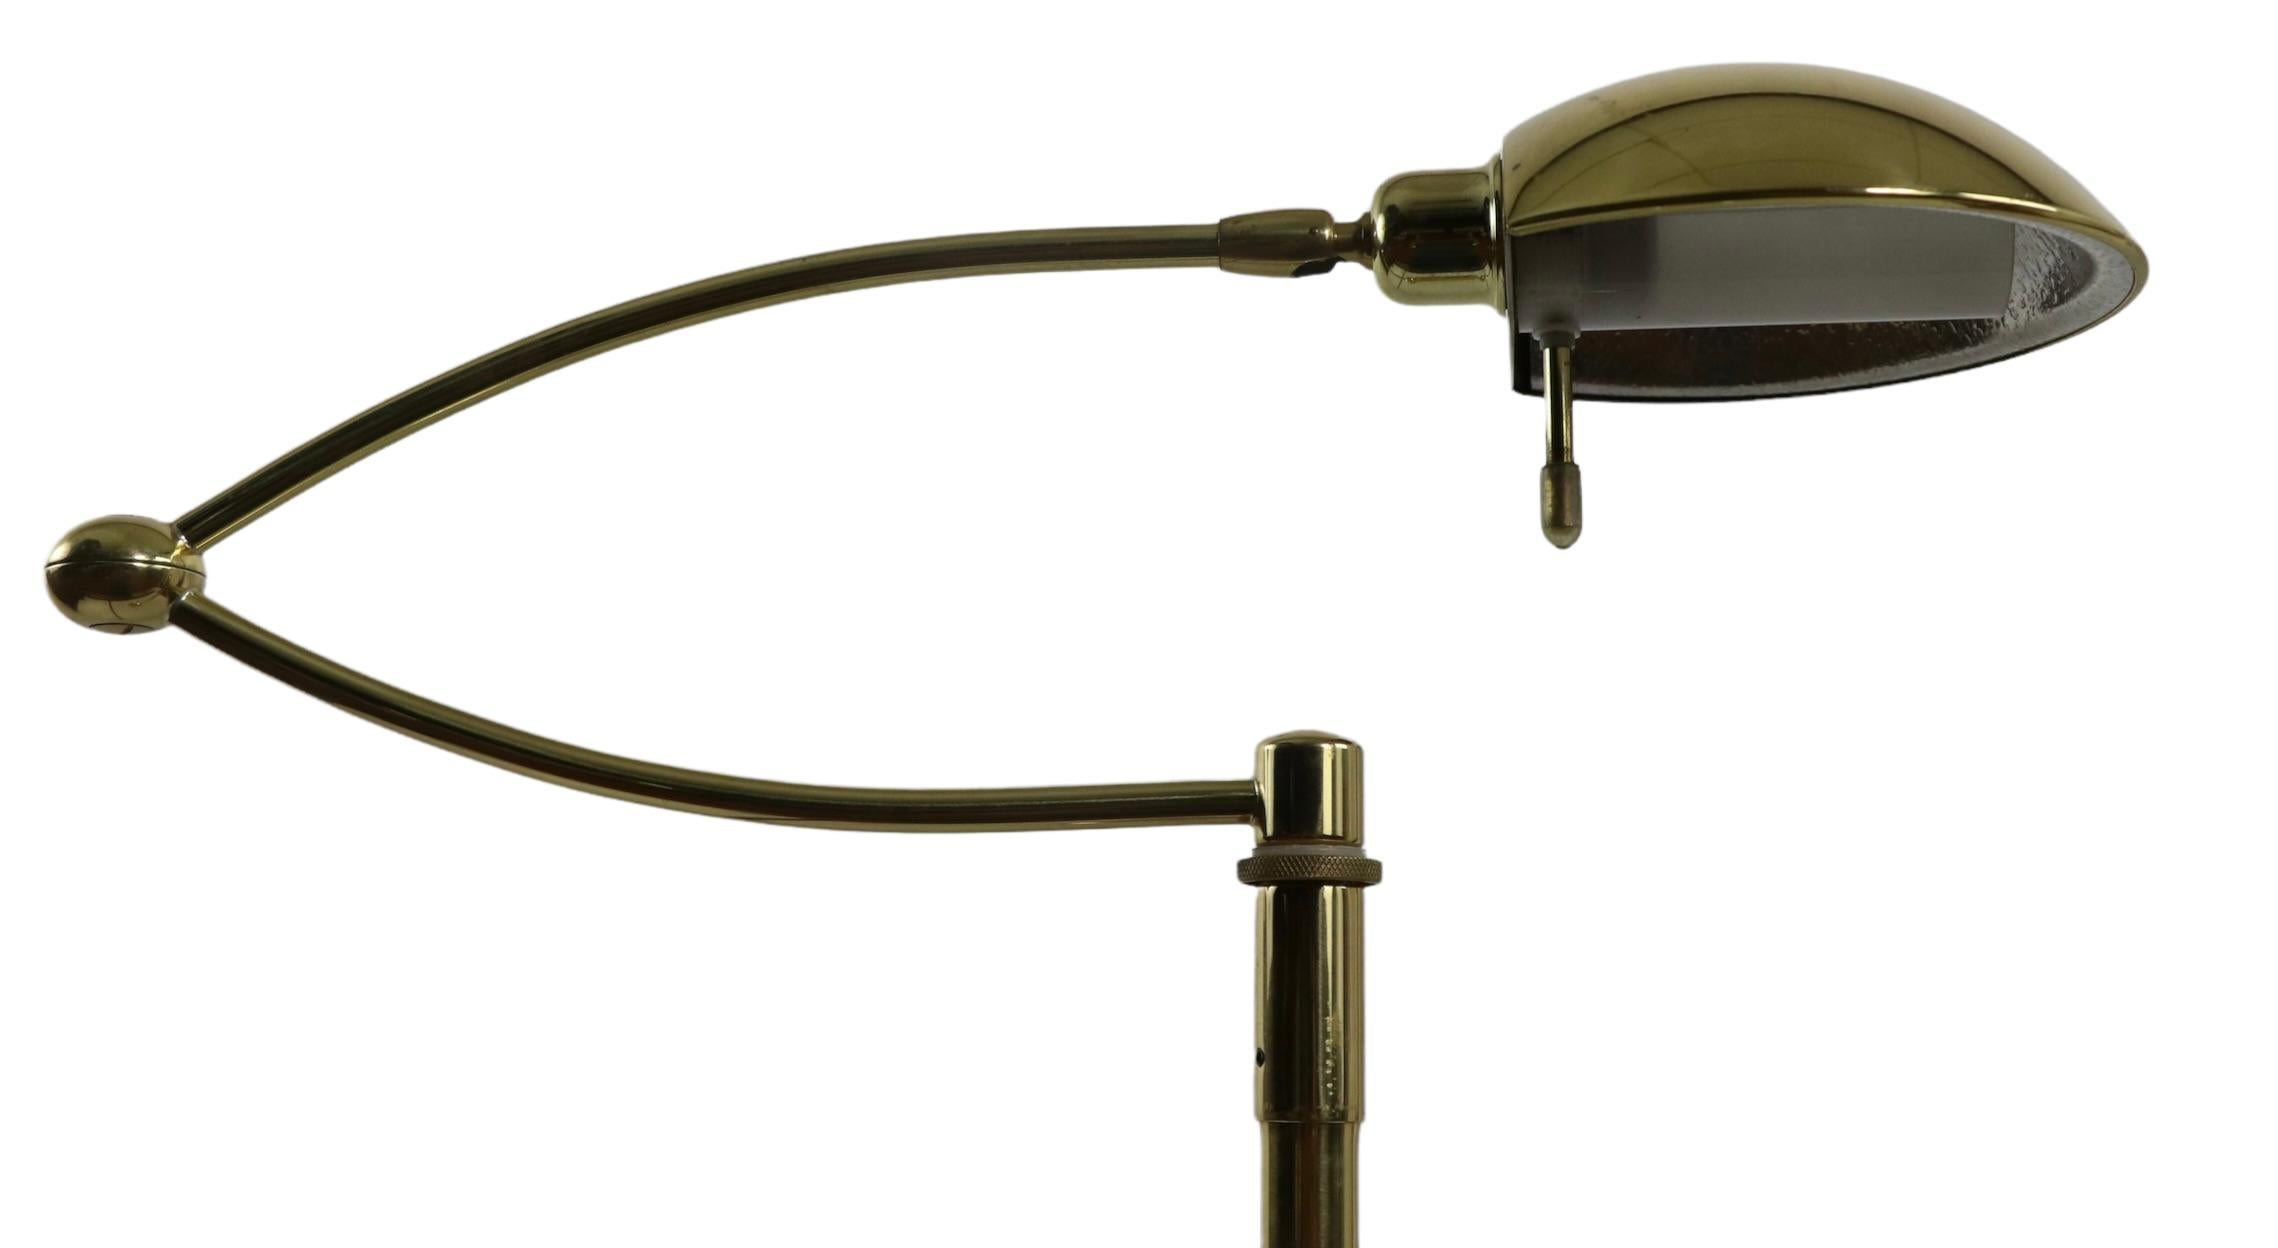 Late 20th Century Adjustable Post Modern Brass Floor Lamp Made in Germany by Holtkotter Leuchten